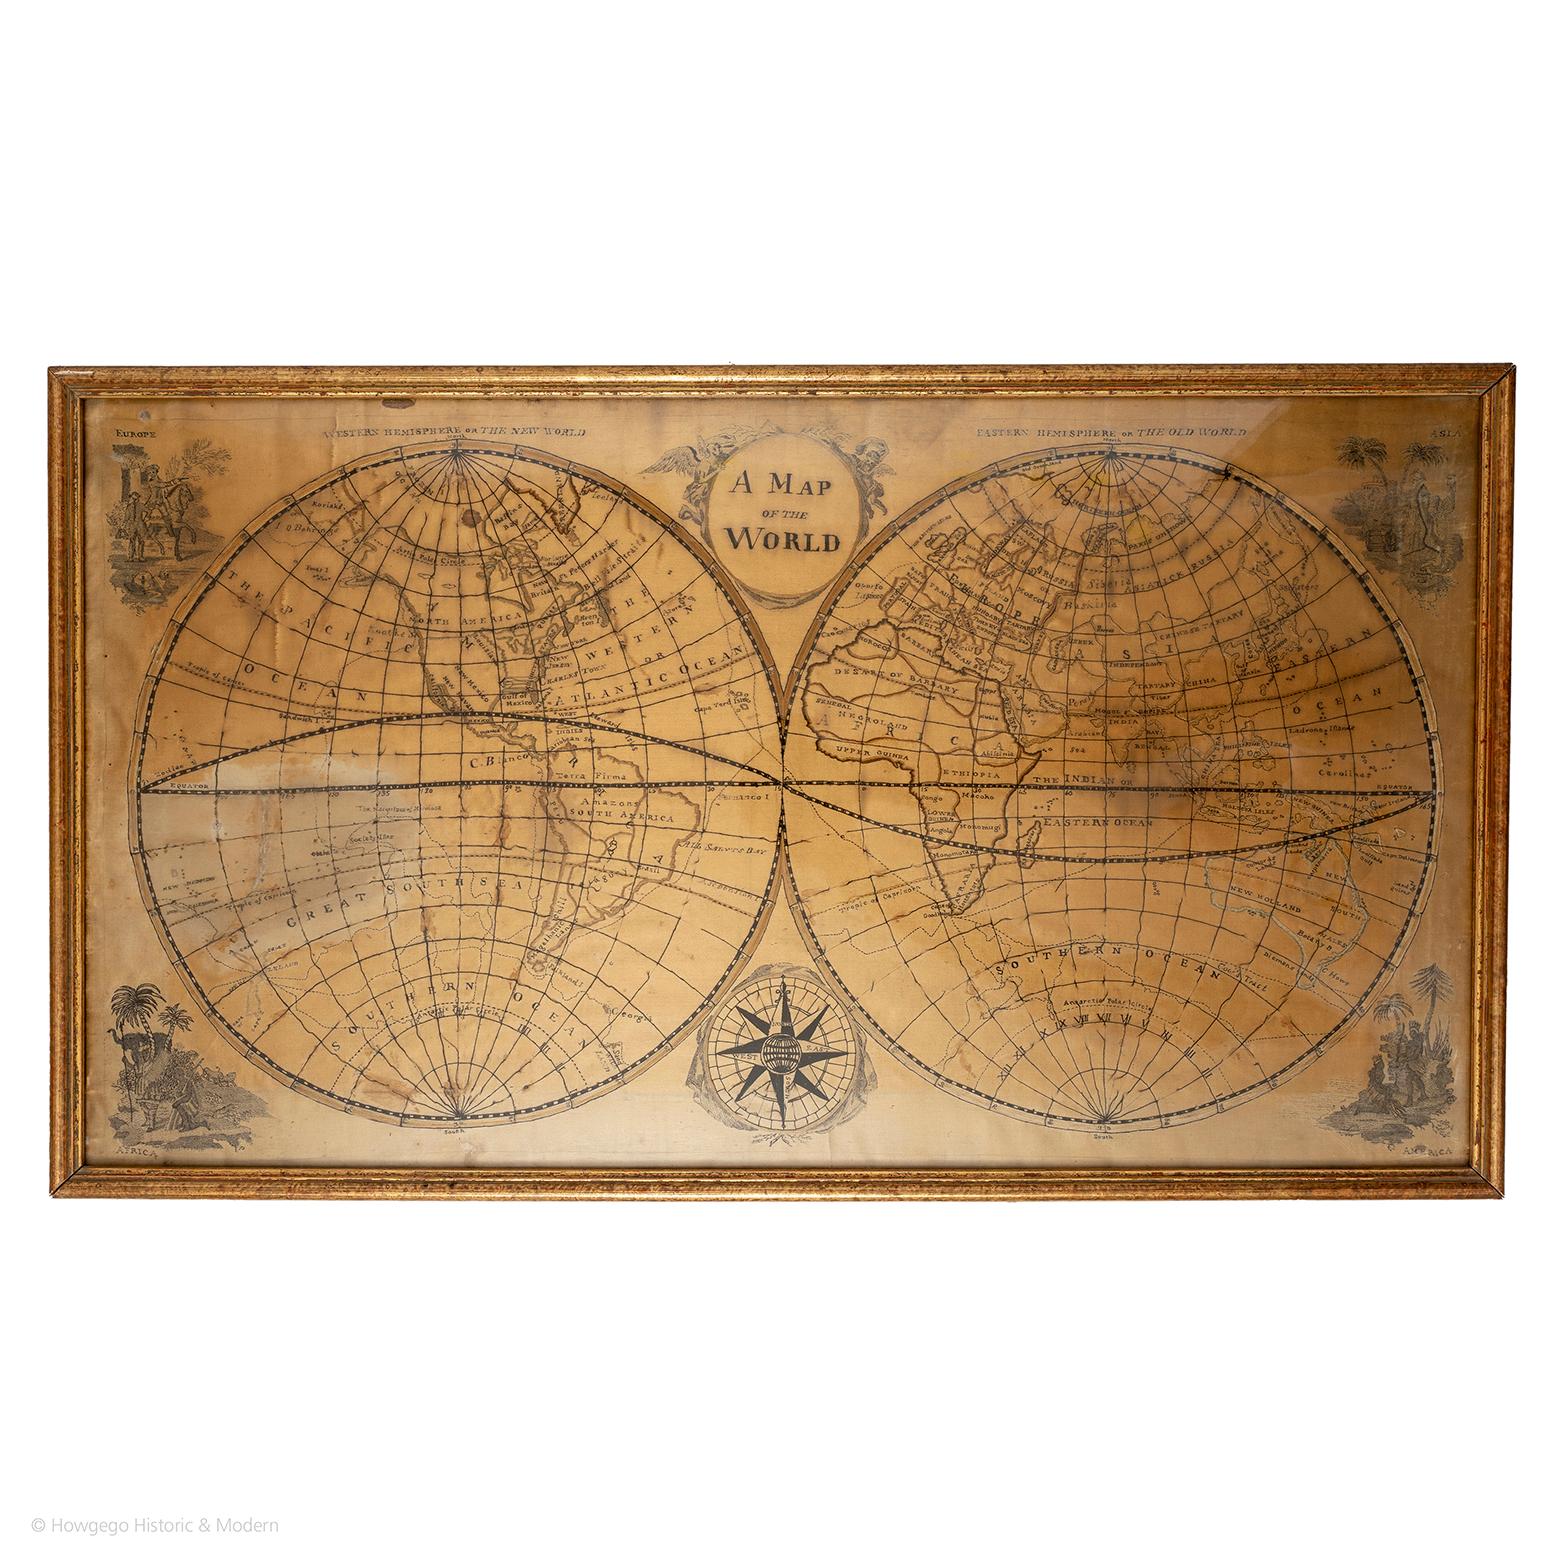 A rare, late-18th century, silk, embroidered, double hemisphere, world map, blackwork, sampler, showing the tracks of captain cook’s three voyages

- Illustrating public understanding of the world in the late-18th century and the recent